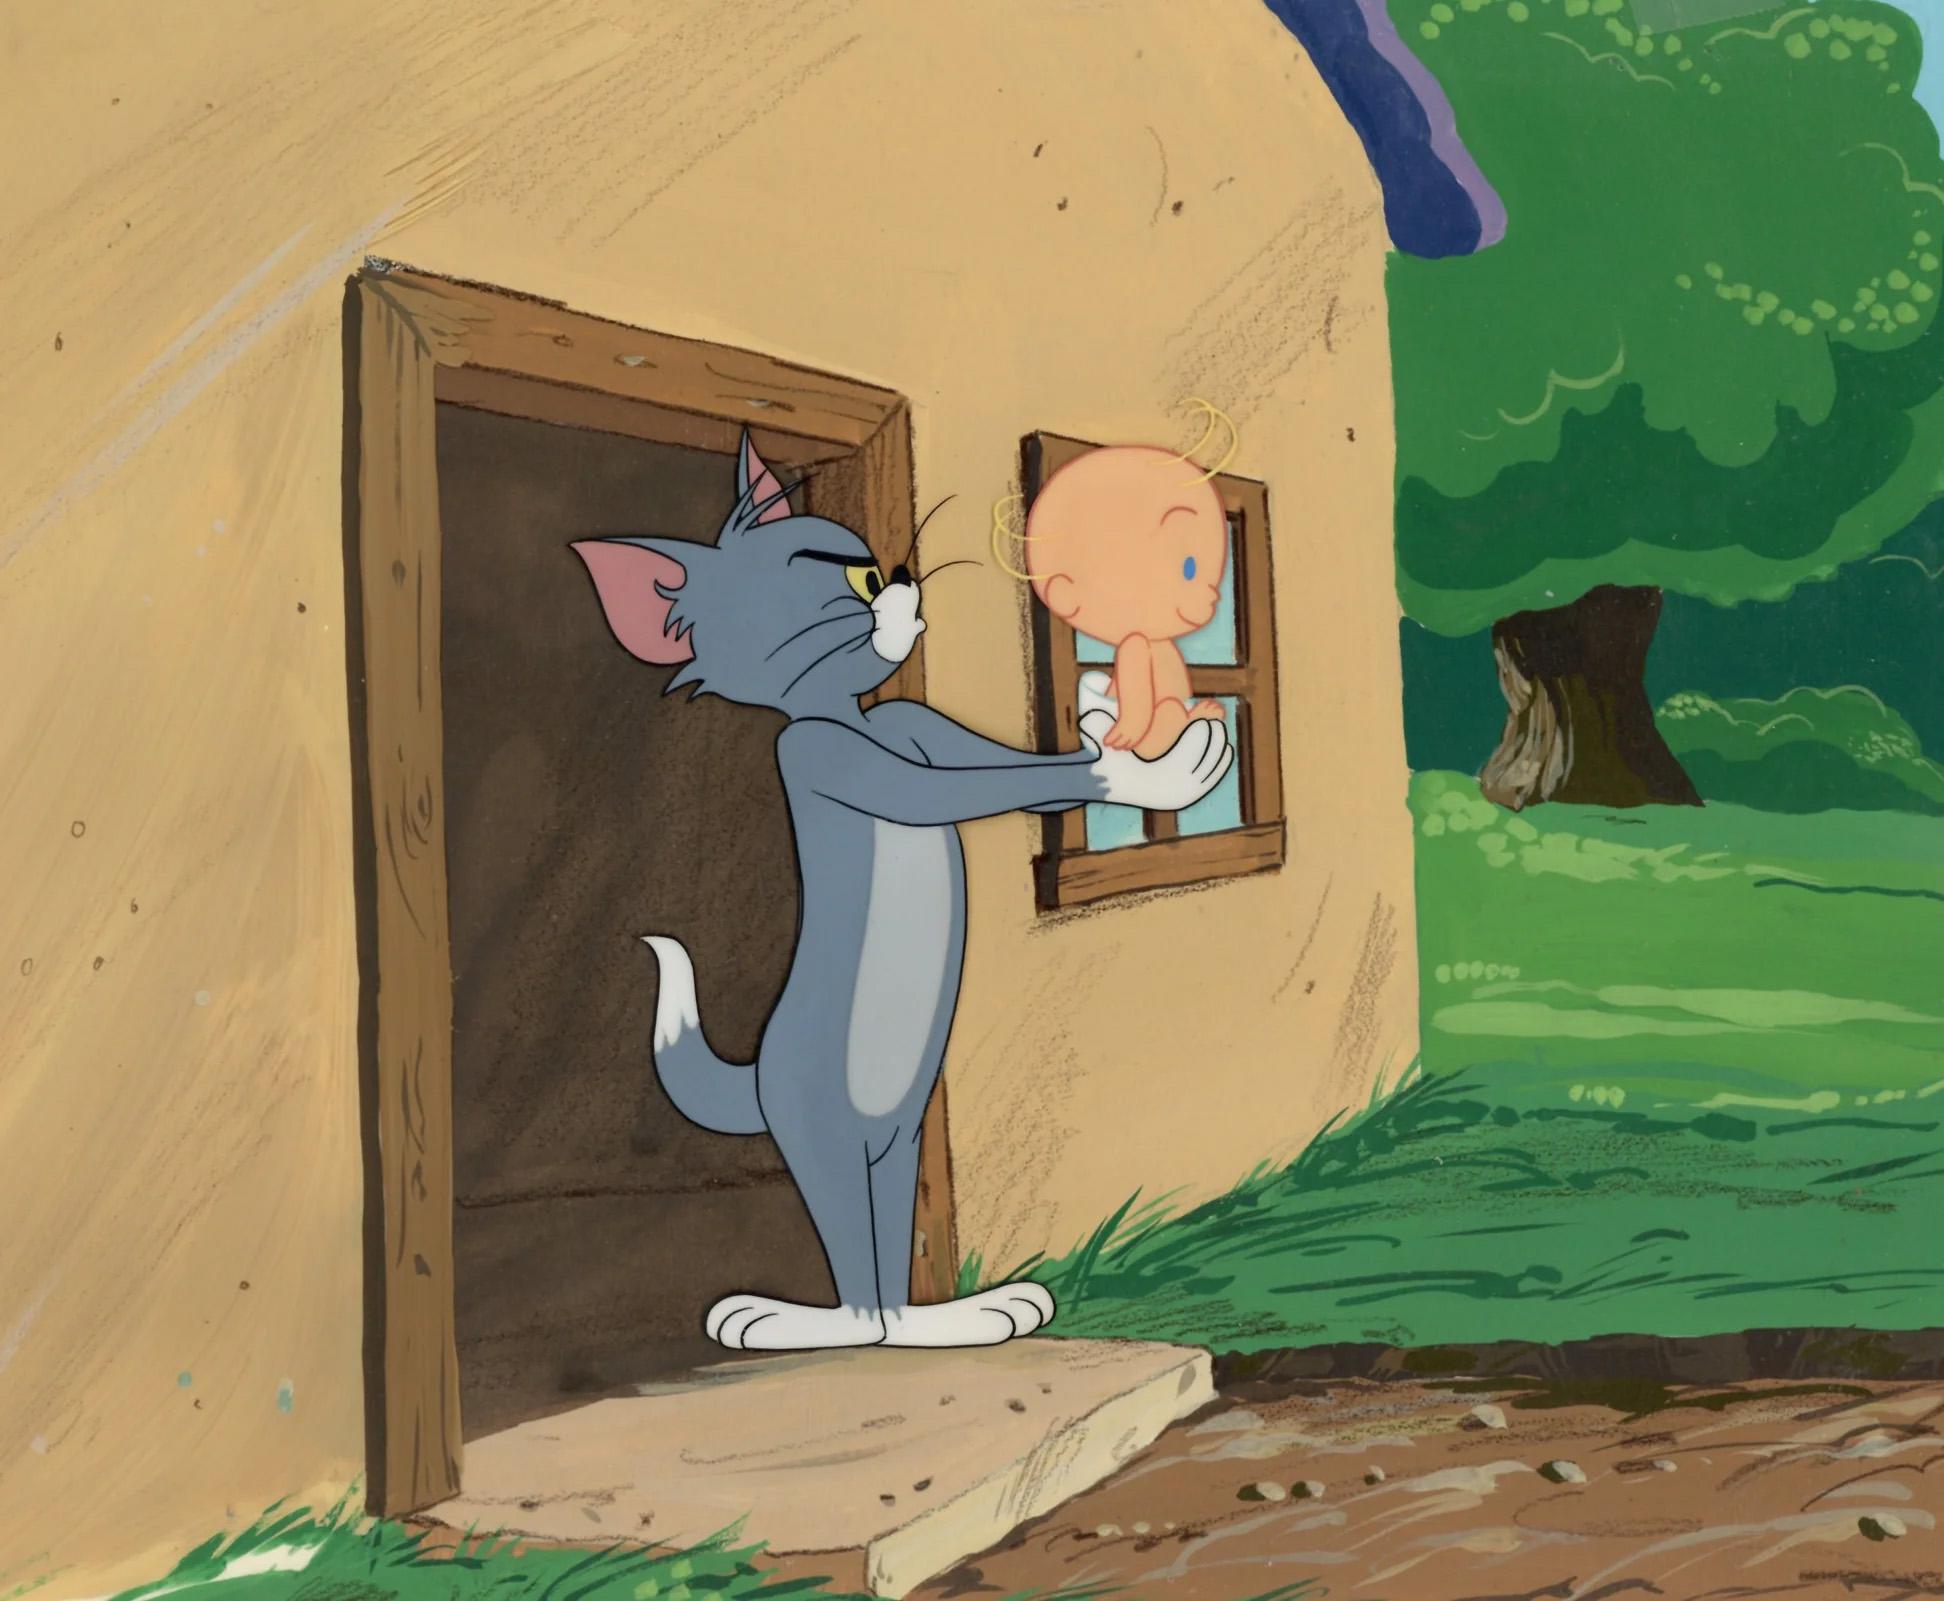 Tom and Jerry 1958 Original Production Cel on Hand-Painted Background: Tom, Baby - Art by Hanna Barbera Studio Artists